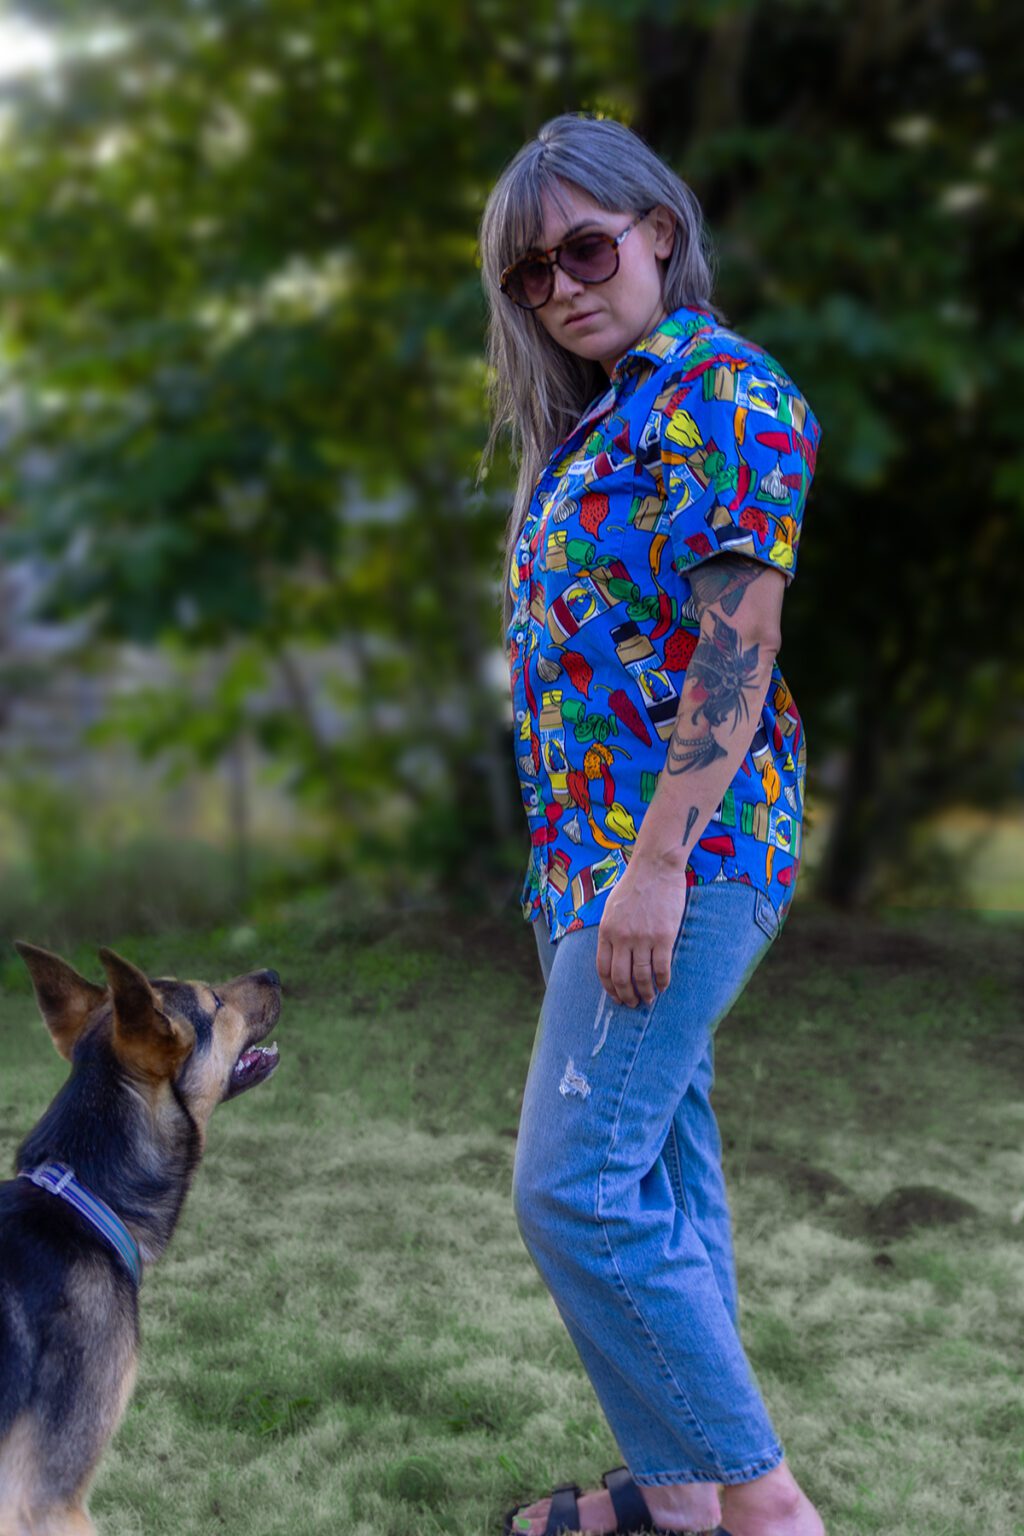 woman standing next to dog, wearing the new Secret Aardvark button up shirt. The shirt is ble with bright colored peppers and bottles of secret aardvark.